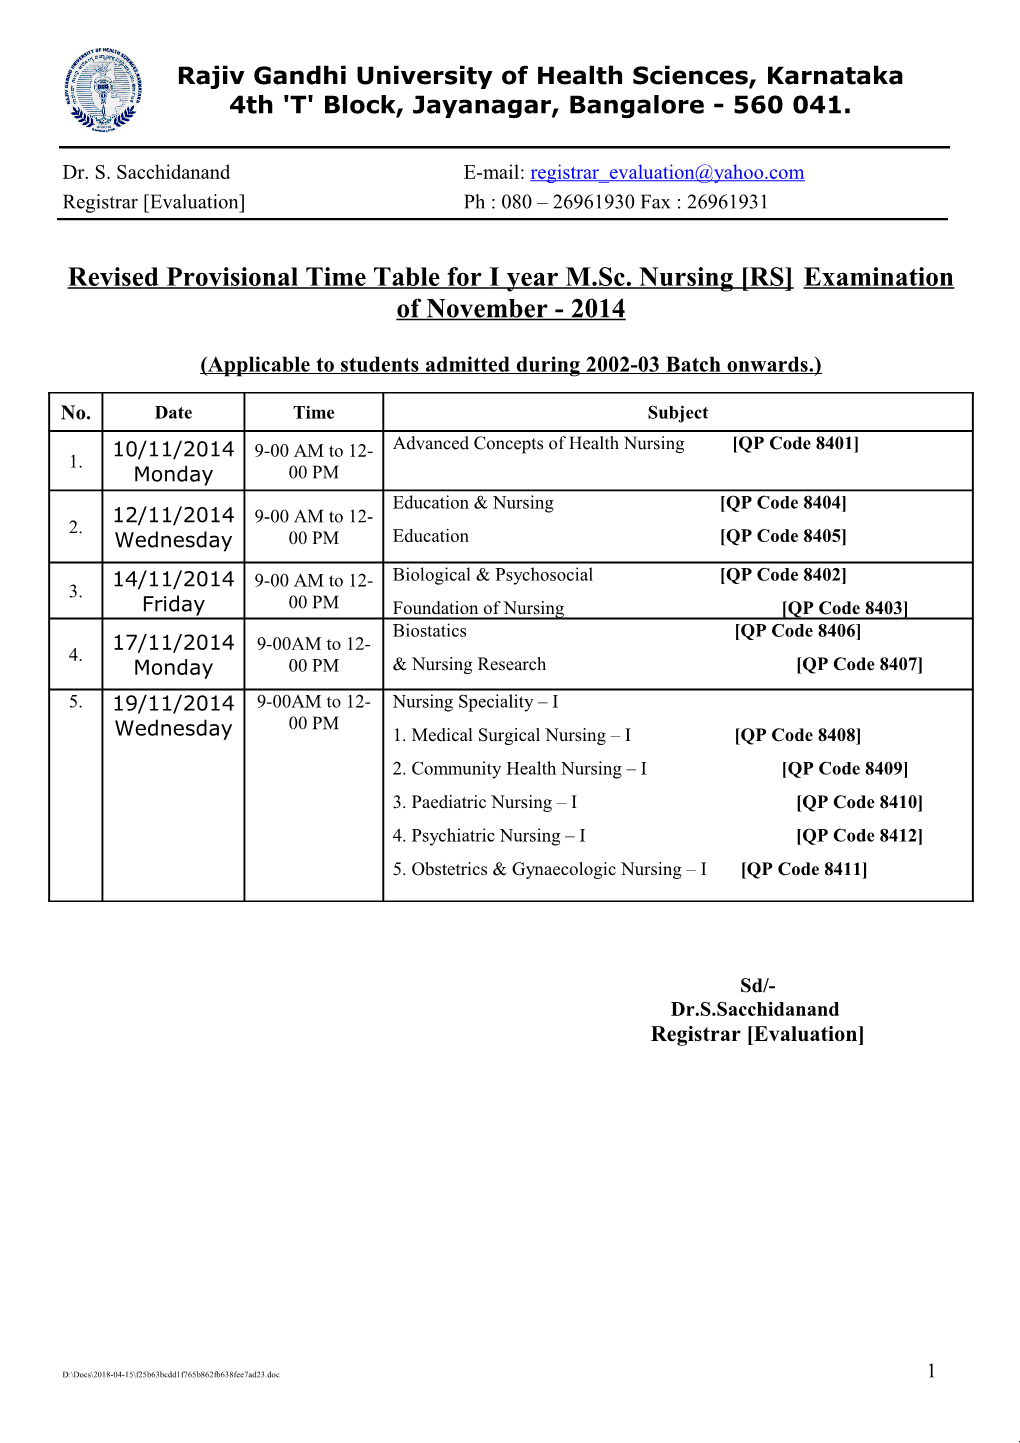 Revised Provisional Time Table for I Year M.Sc. Nursing RS Examination of November - 2014